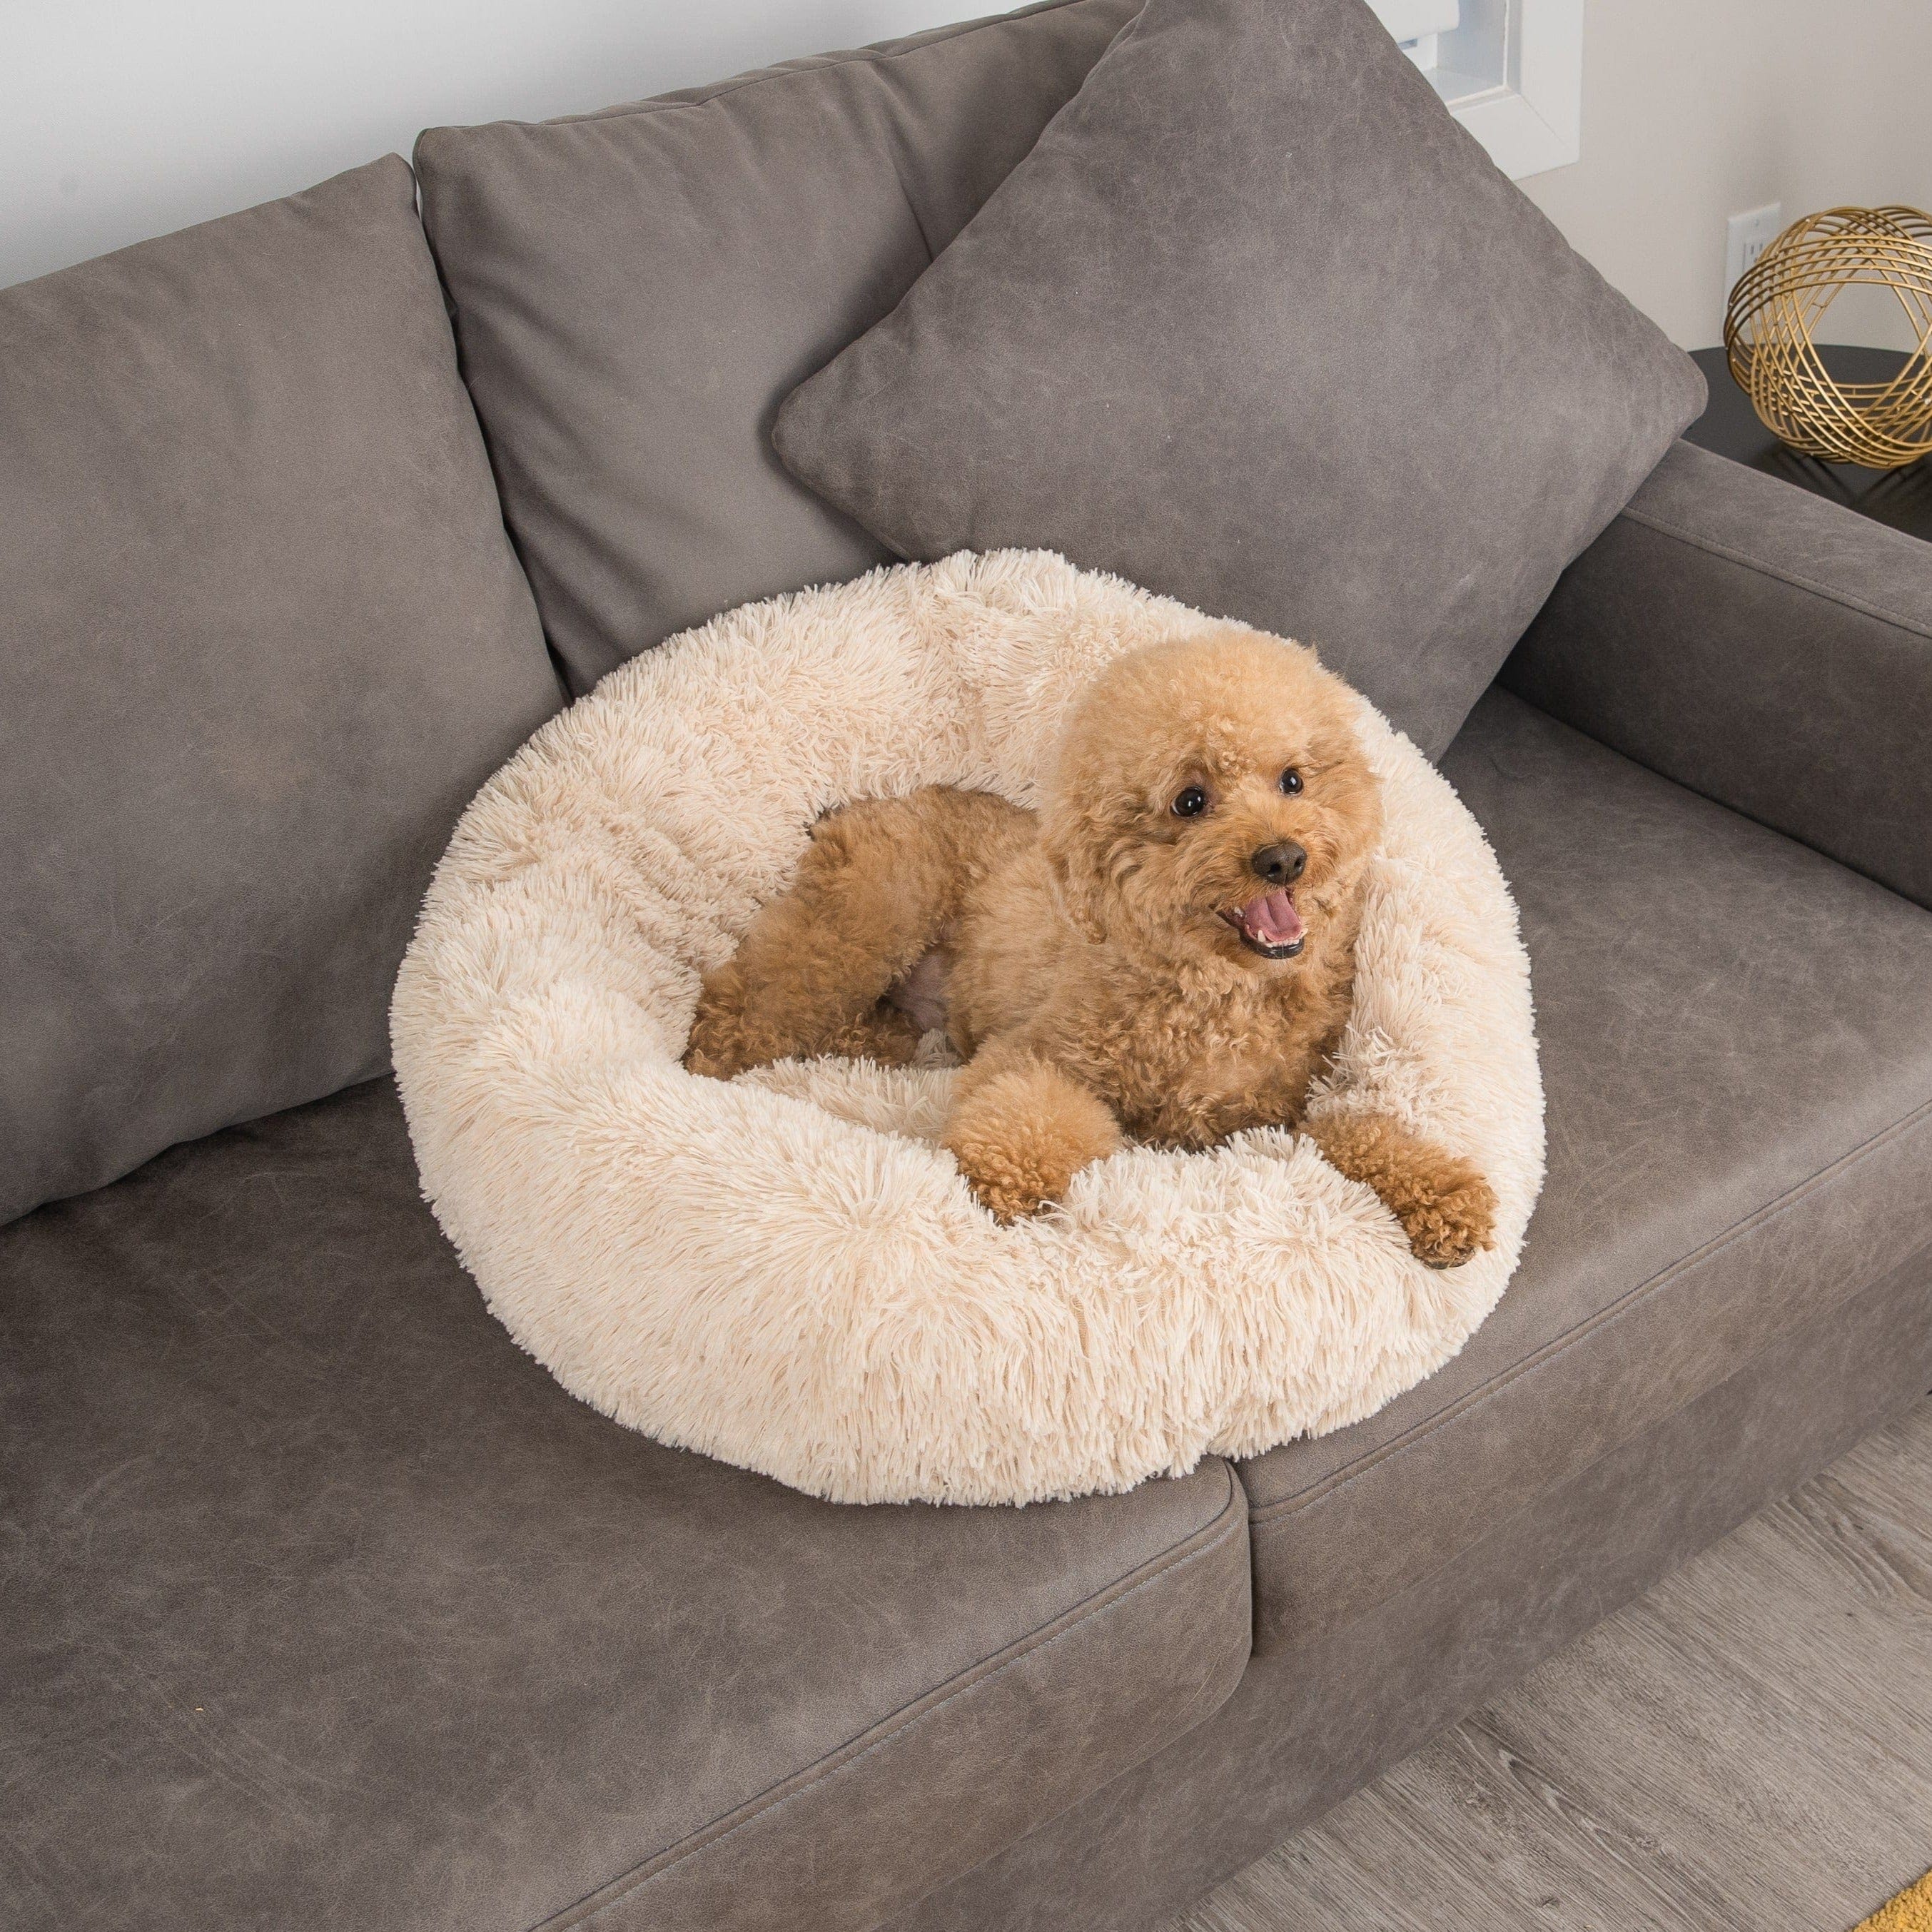 Anti-Anxiety Calming Bed for Dogs Comfy Fur Donut Cuddler Cozy Pet Bed